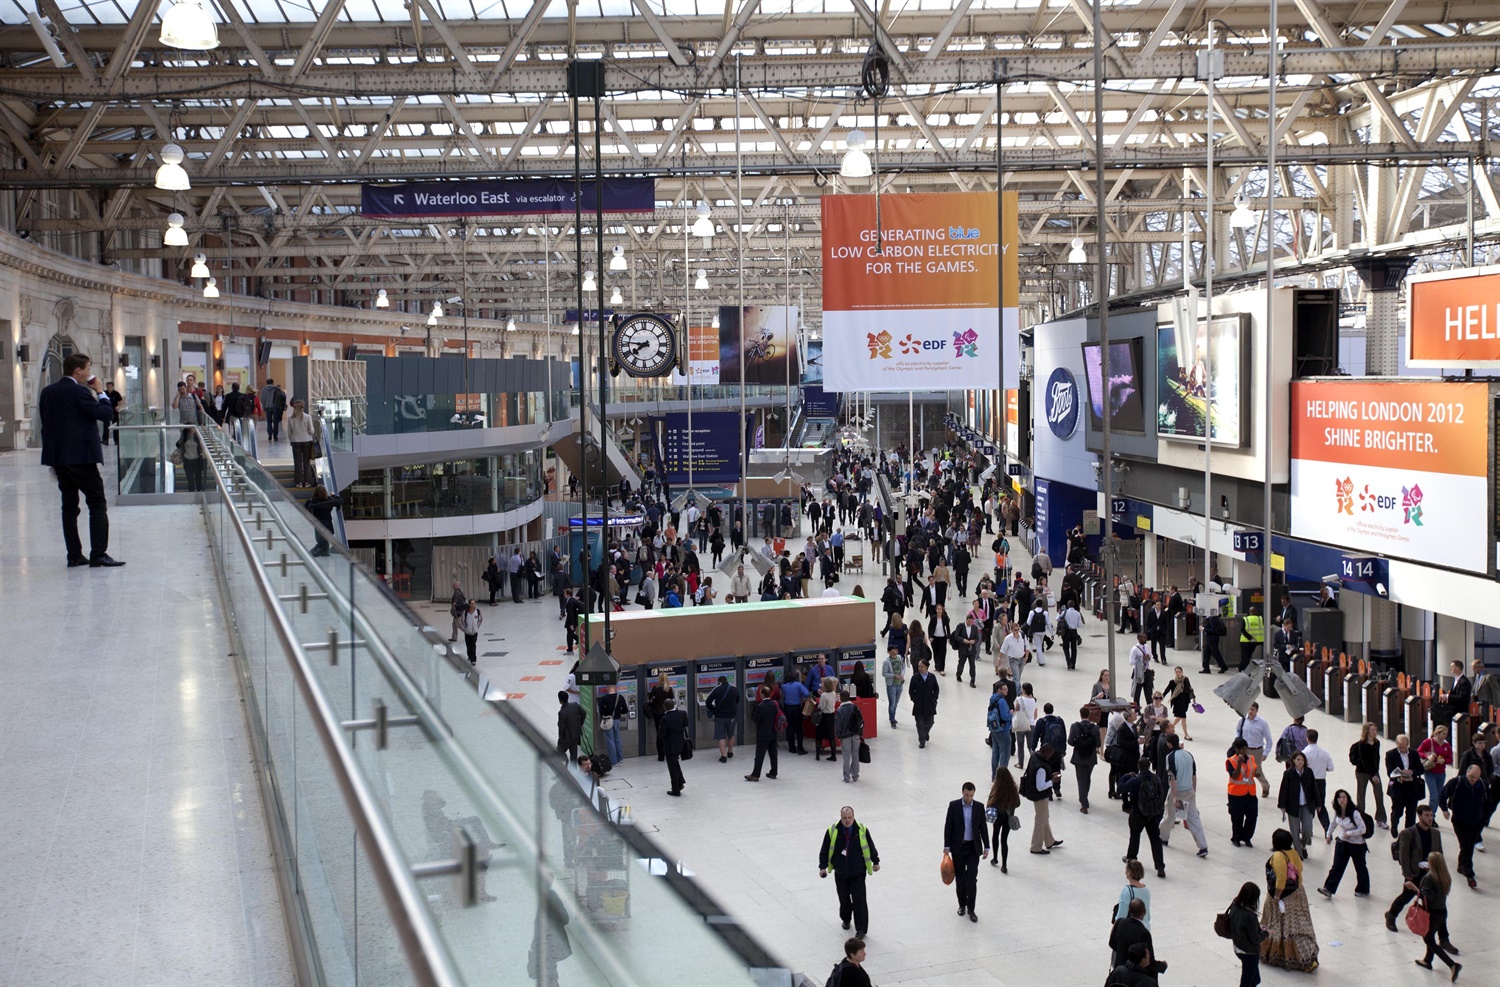 Major stations could be sold off to plug Network Rail debt